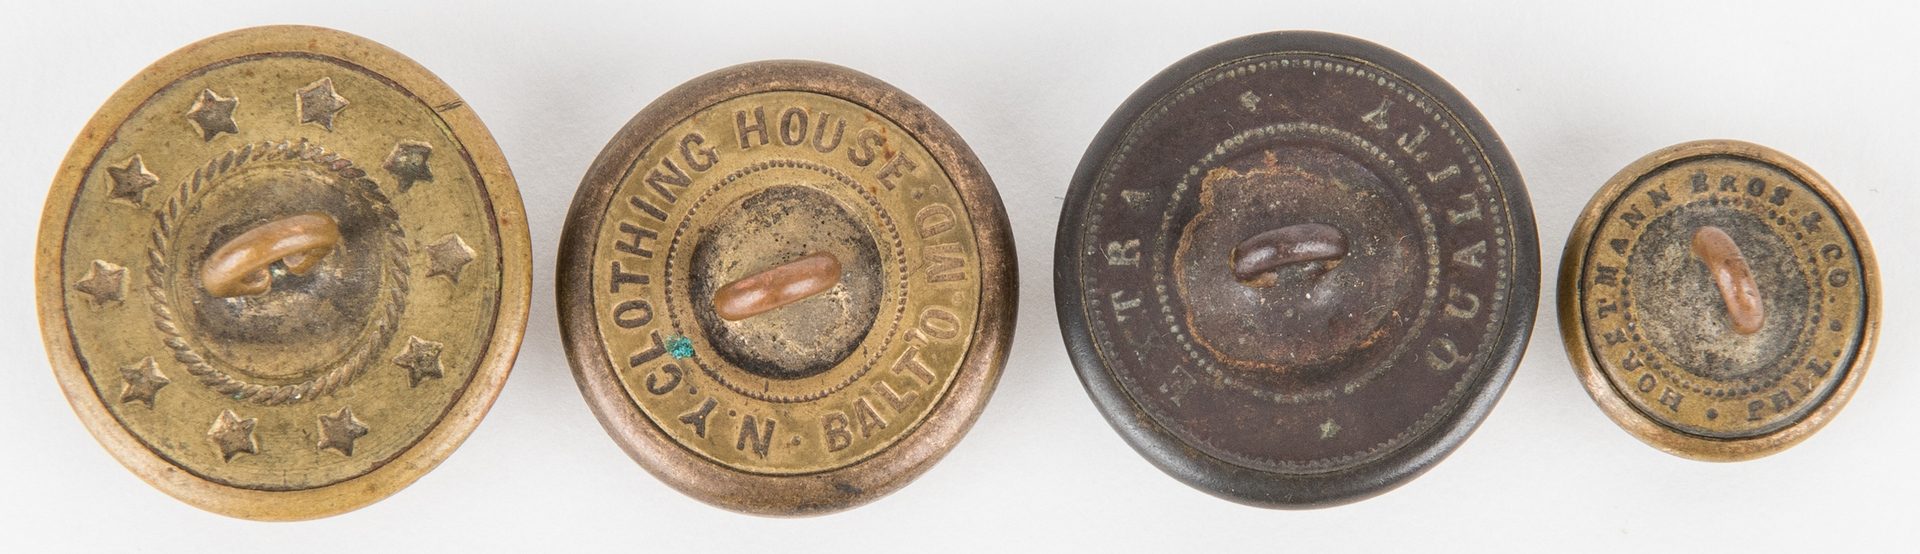 Lot 275: 19 Civil War and Later Items, incl. Belt Plate, Buttons